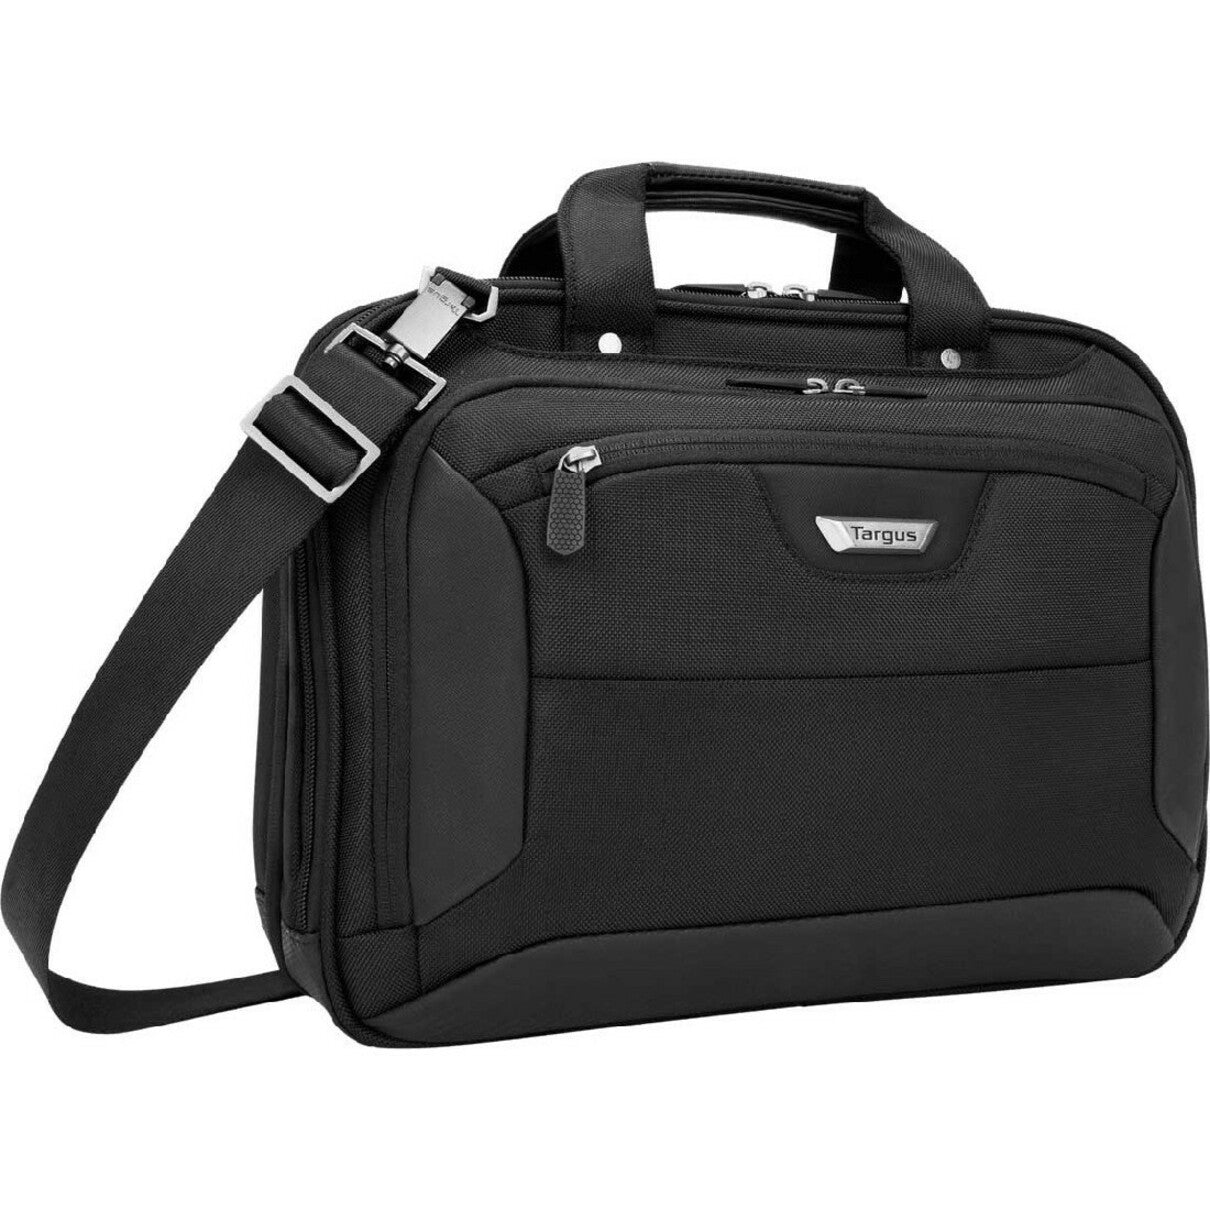 Targus Corporate Traveler CUCT02UA14S Carrying Case (Briefcase) for 14" Notebook, Tablet - Black Main image